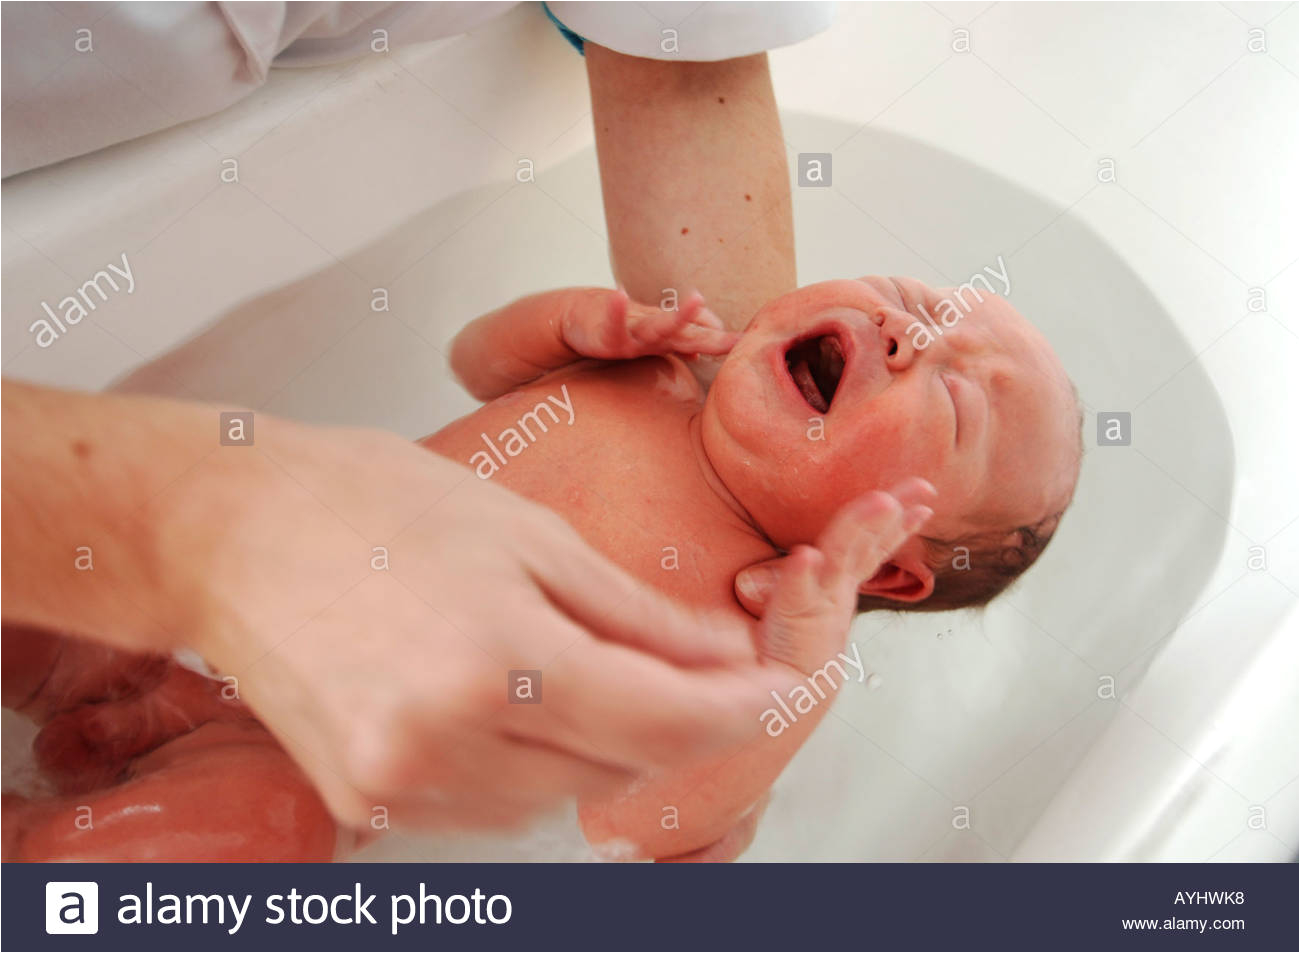 stock photo crying newborn one day old baby boy having his first bath